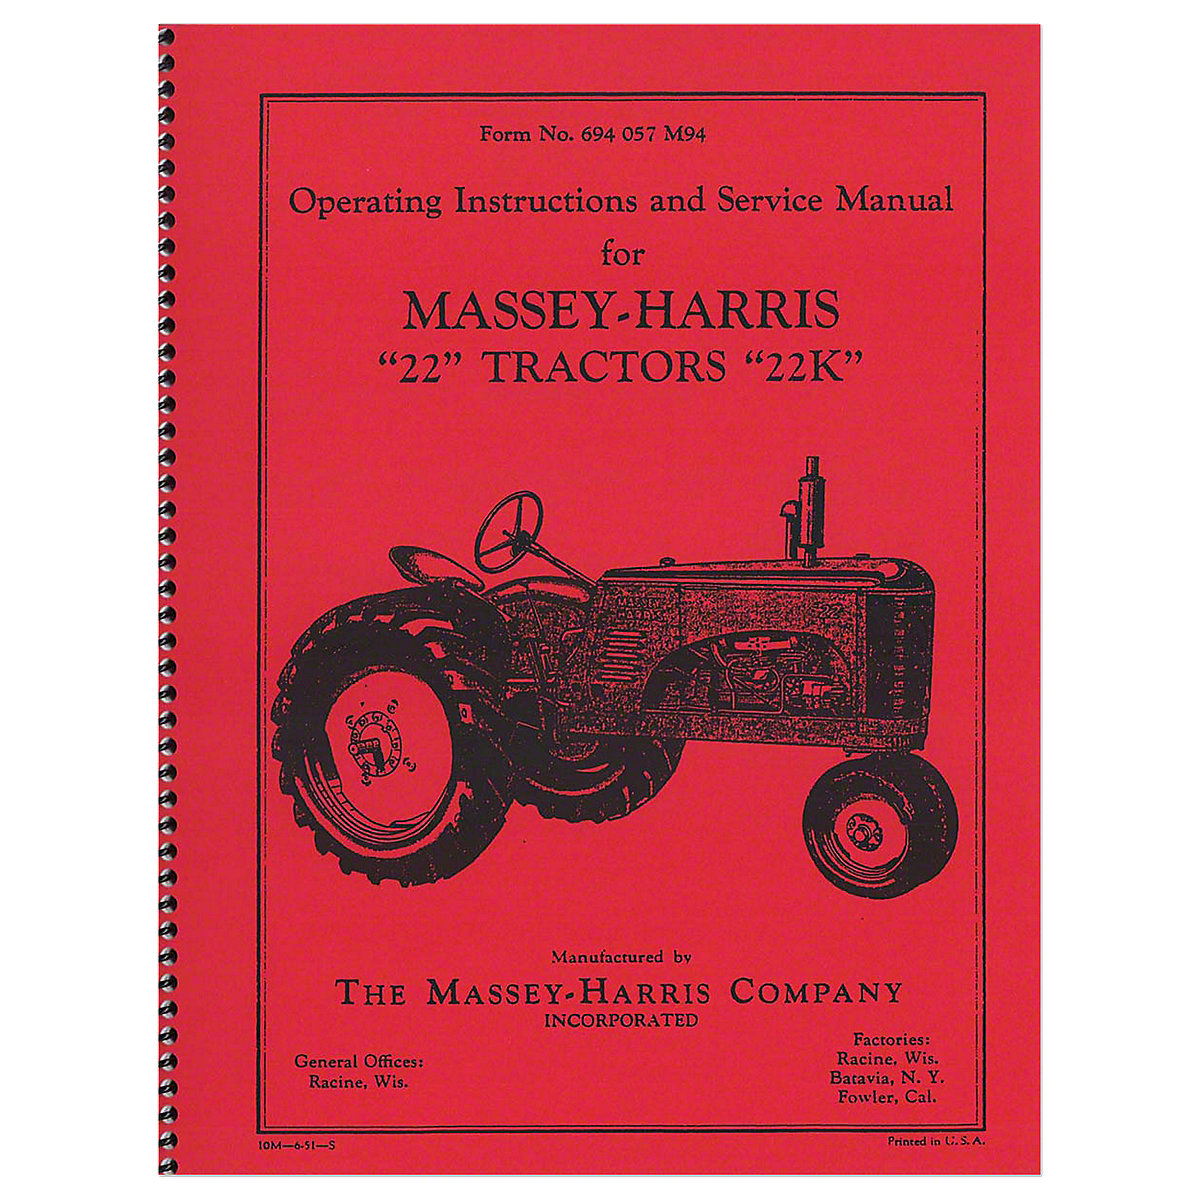 Operation & Service Manual For Massey Harris 22.